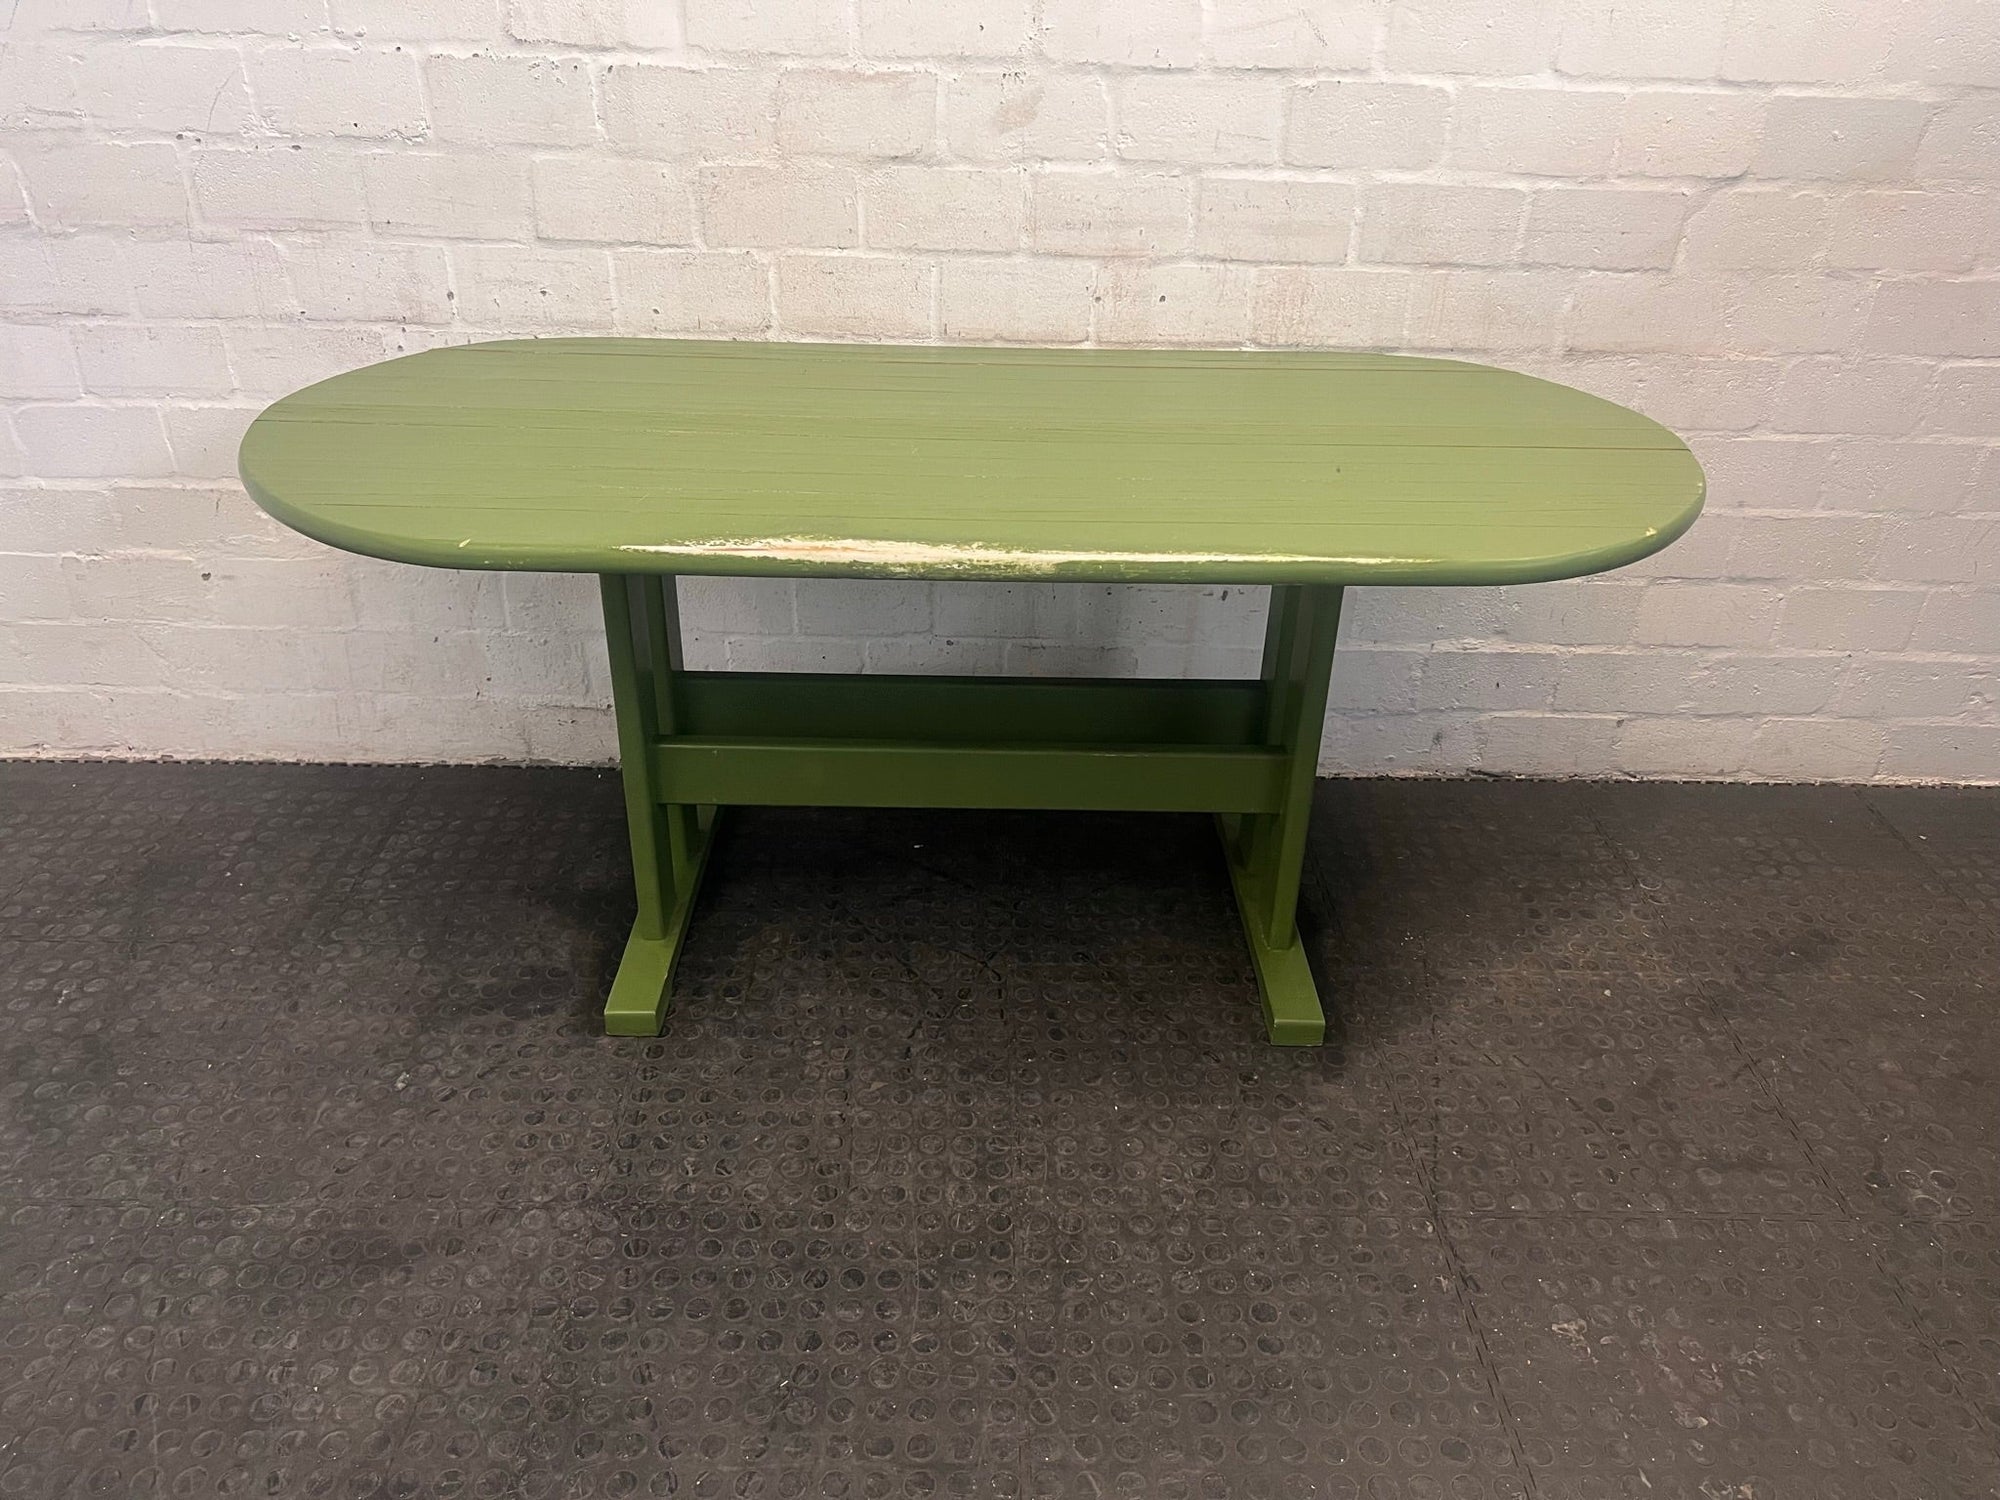 Green Patio/Dining Table (Some Damage to Paint/Sun Damage)